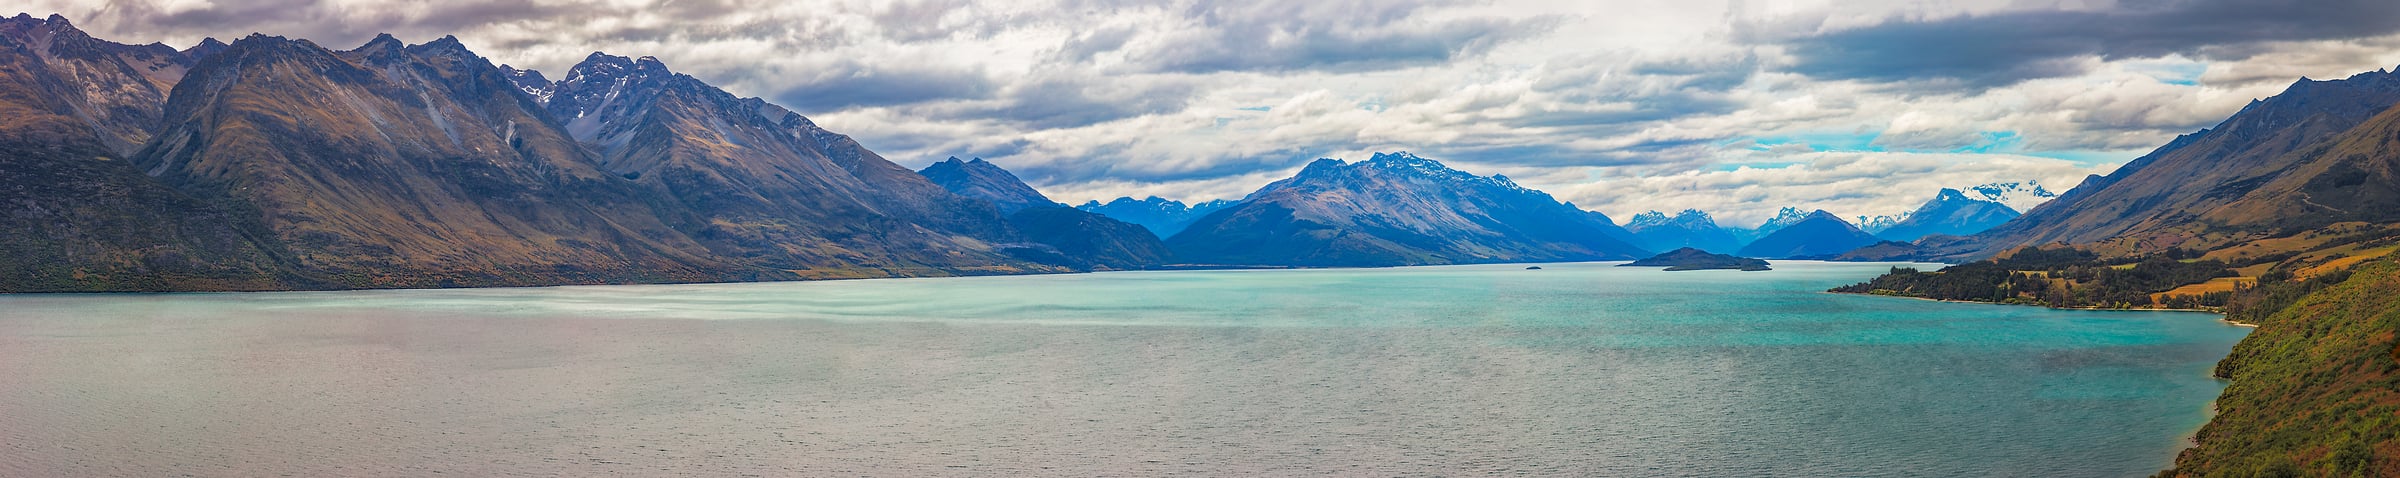 1,366 megapixels! A very high resolution, large-format VAST photo print of a mountain lake; landscape photograph created by John Freeman in Bennetts Bluff Lookout, Glenorchy-Queenstown Road, New Zealand.